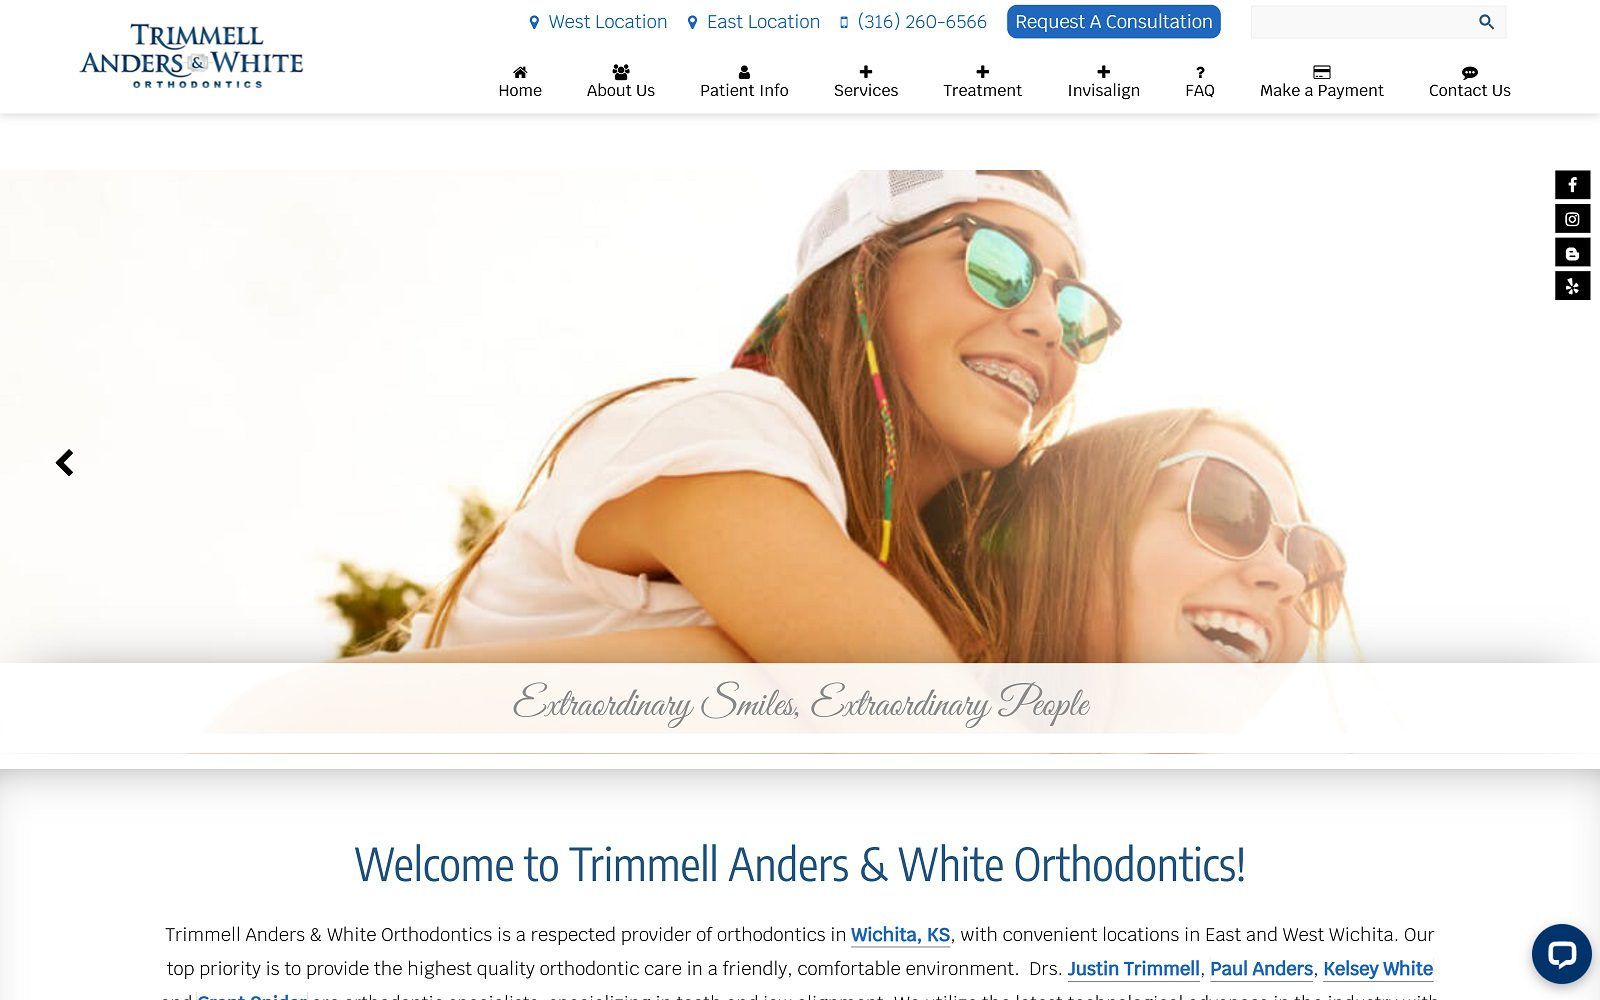 The screenshot of trimmell anders & white orthodontics website